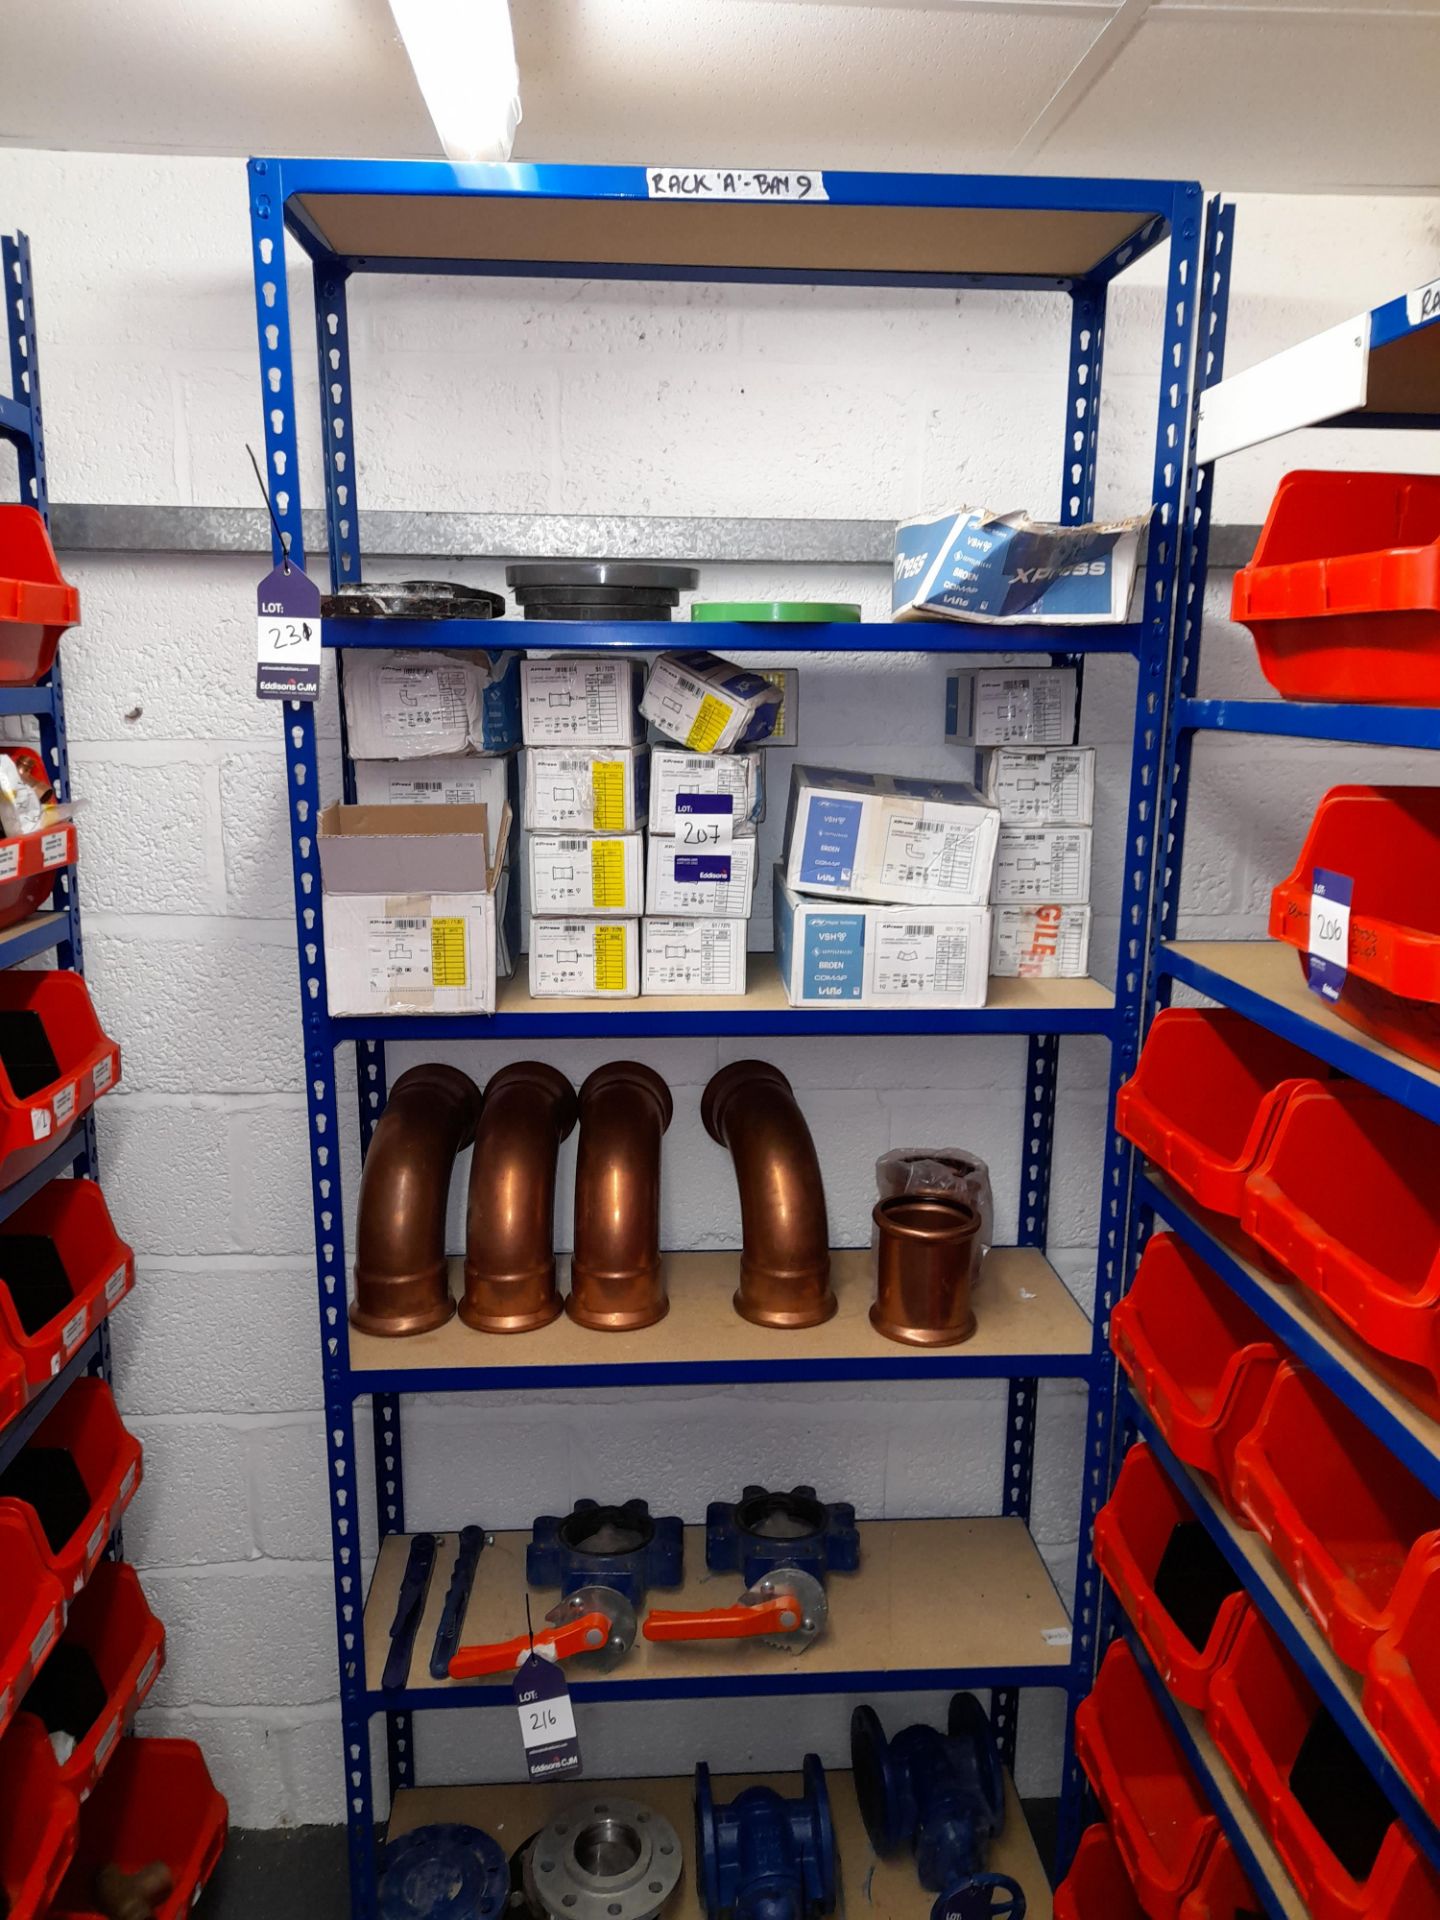 8 x bays of boltless lightweight shelving 2200 x 920 x 460 (Delayed collection, to be arranged - Image 2 of 2